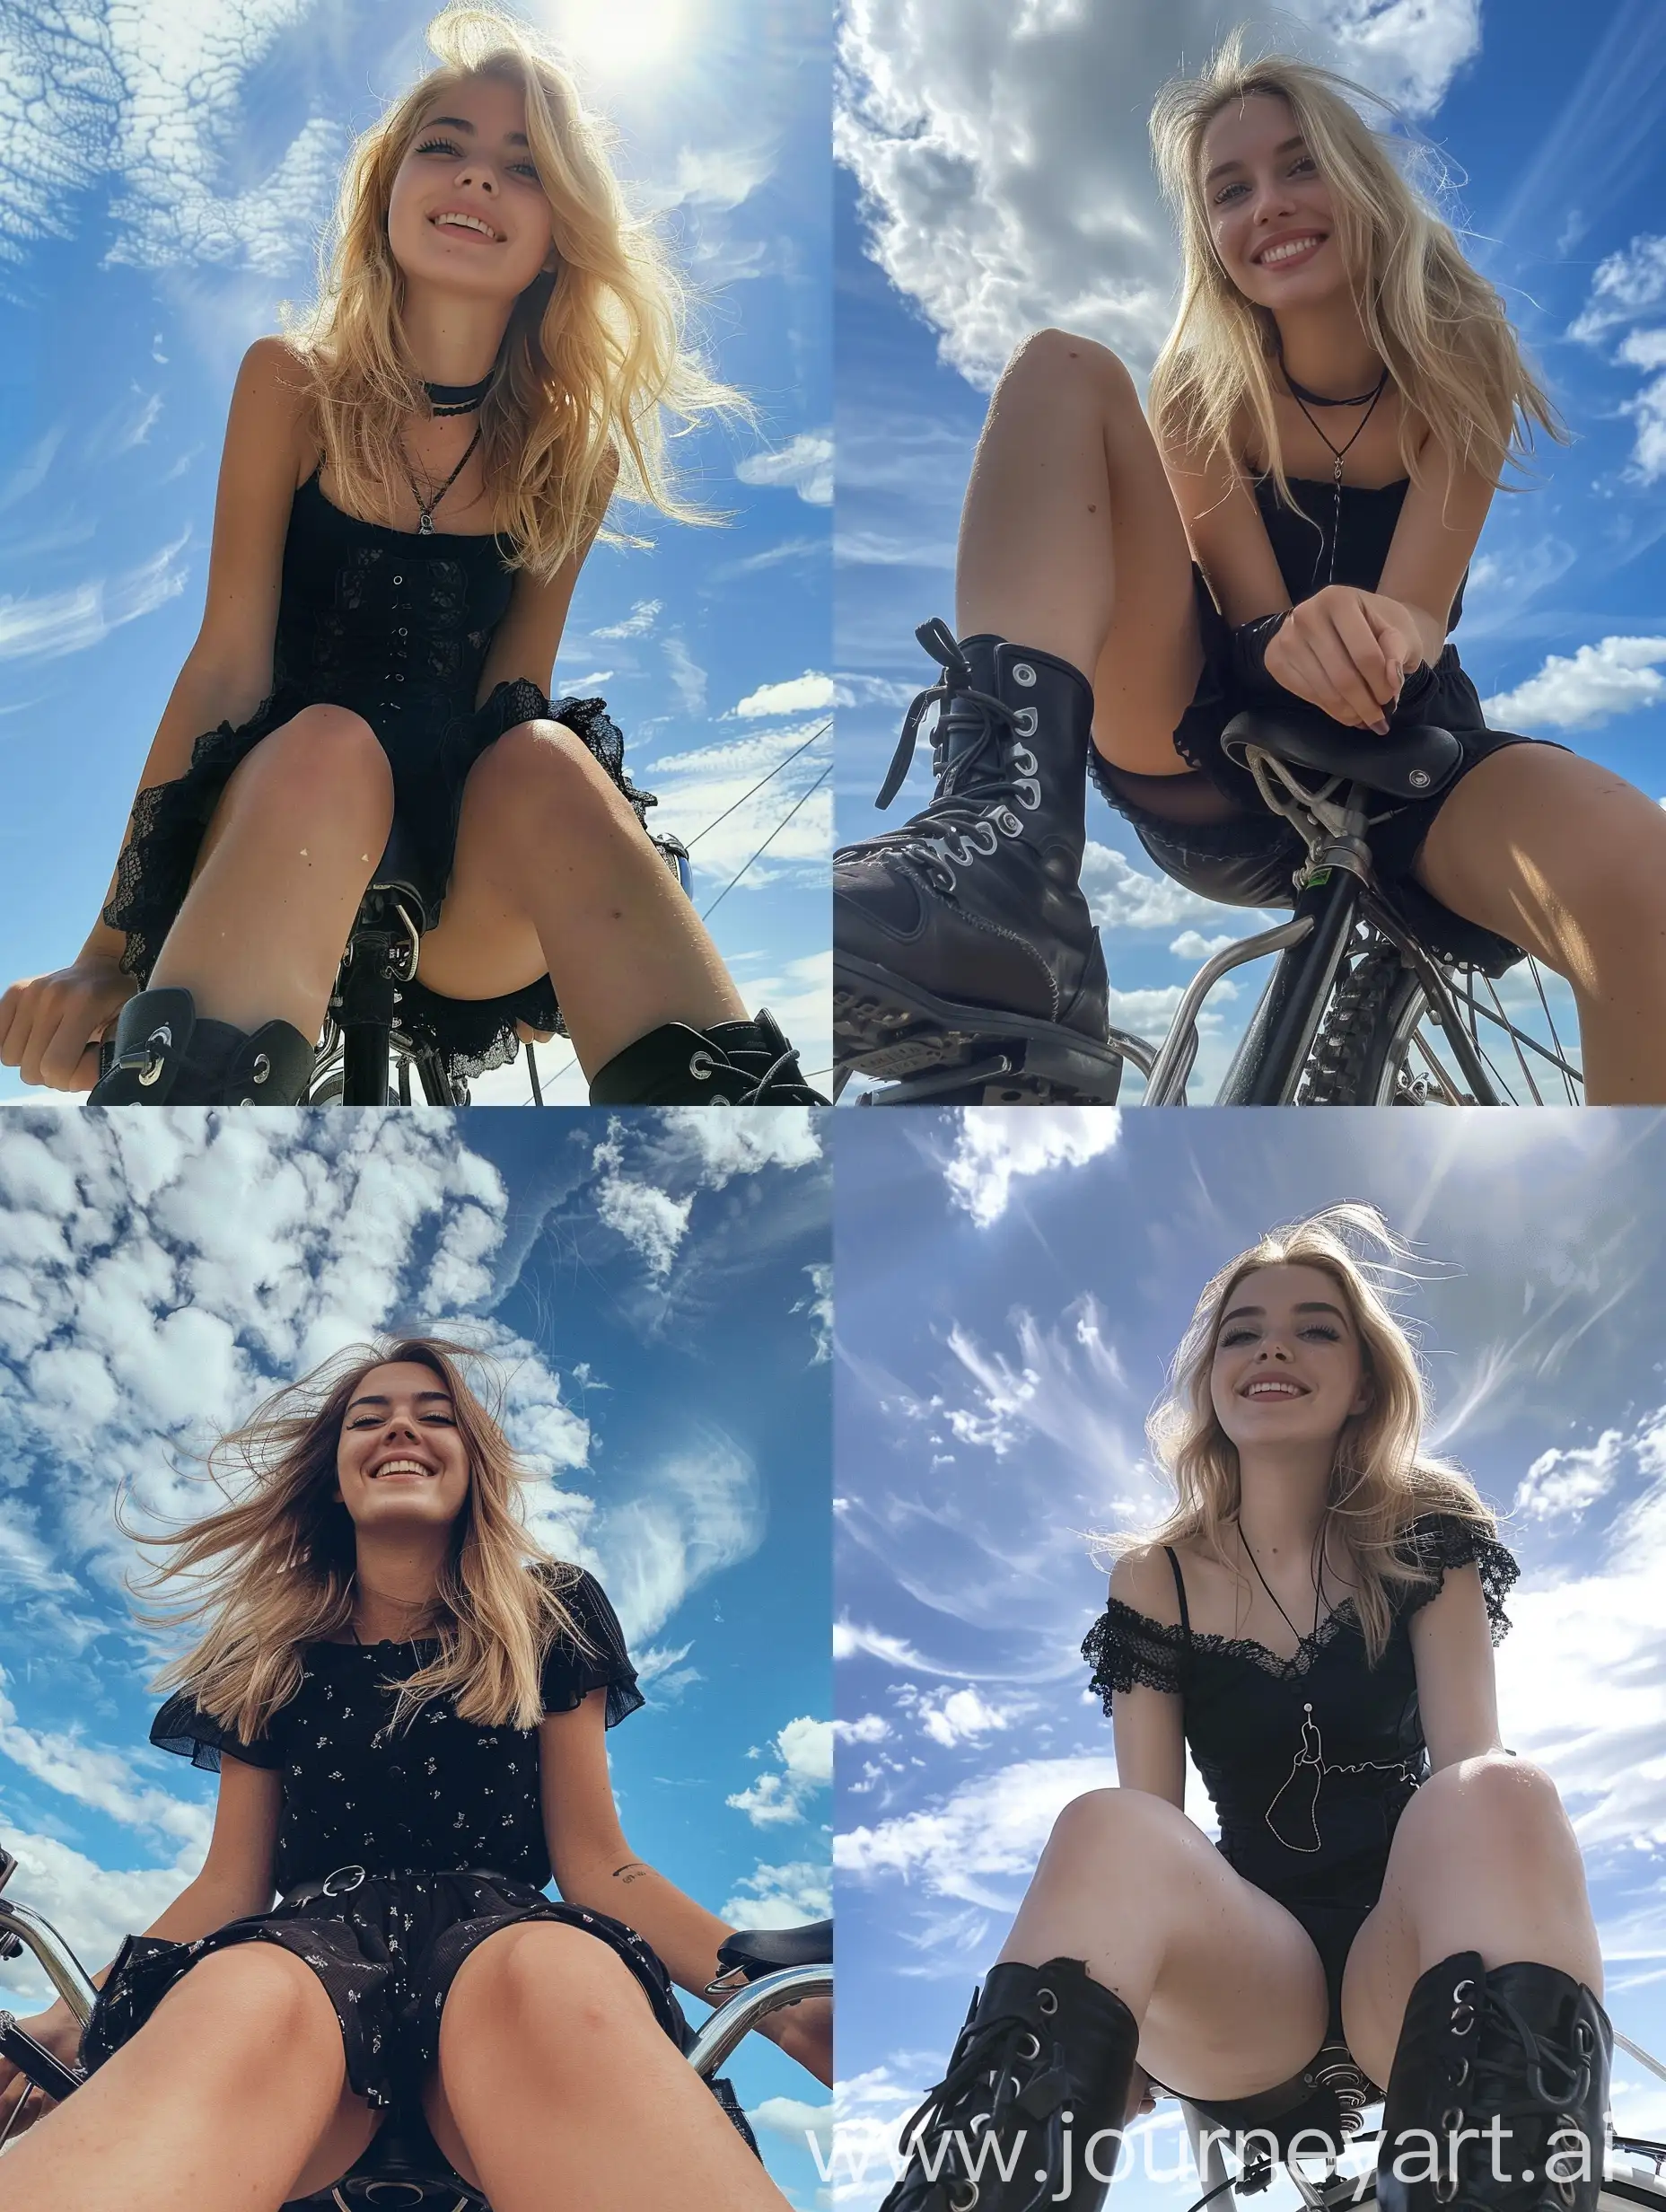 Young-Woman-in-Black-Dress-and-Boots-Smiling-on-Bicycle-Selfie